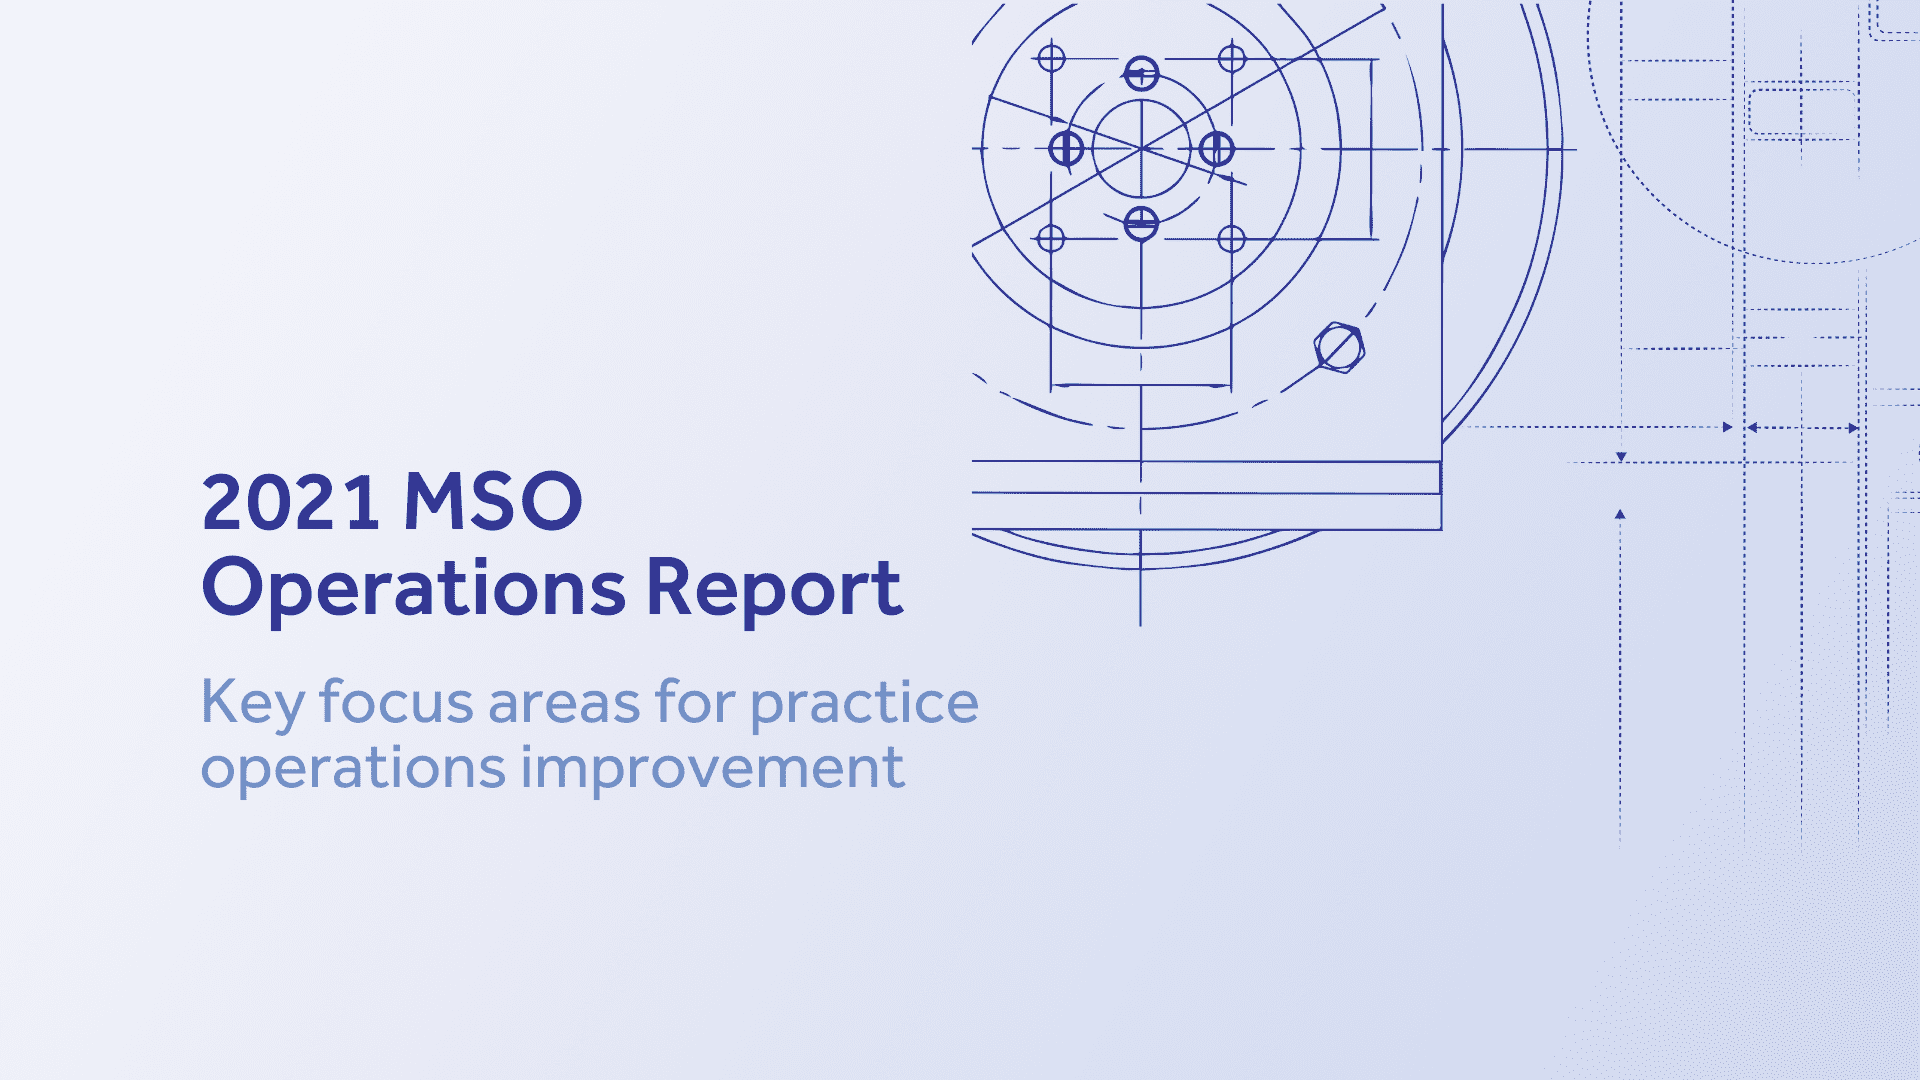 Improving MSO Operations in 2021